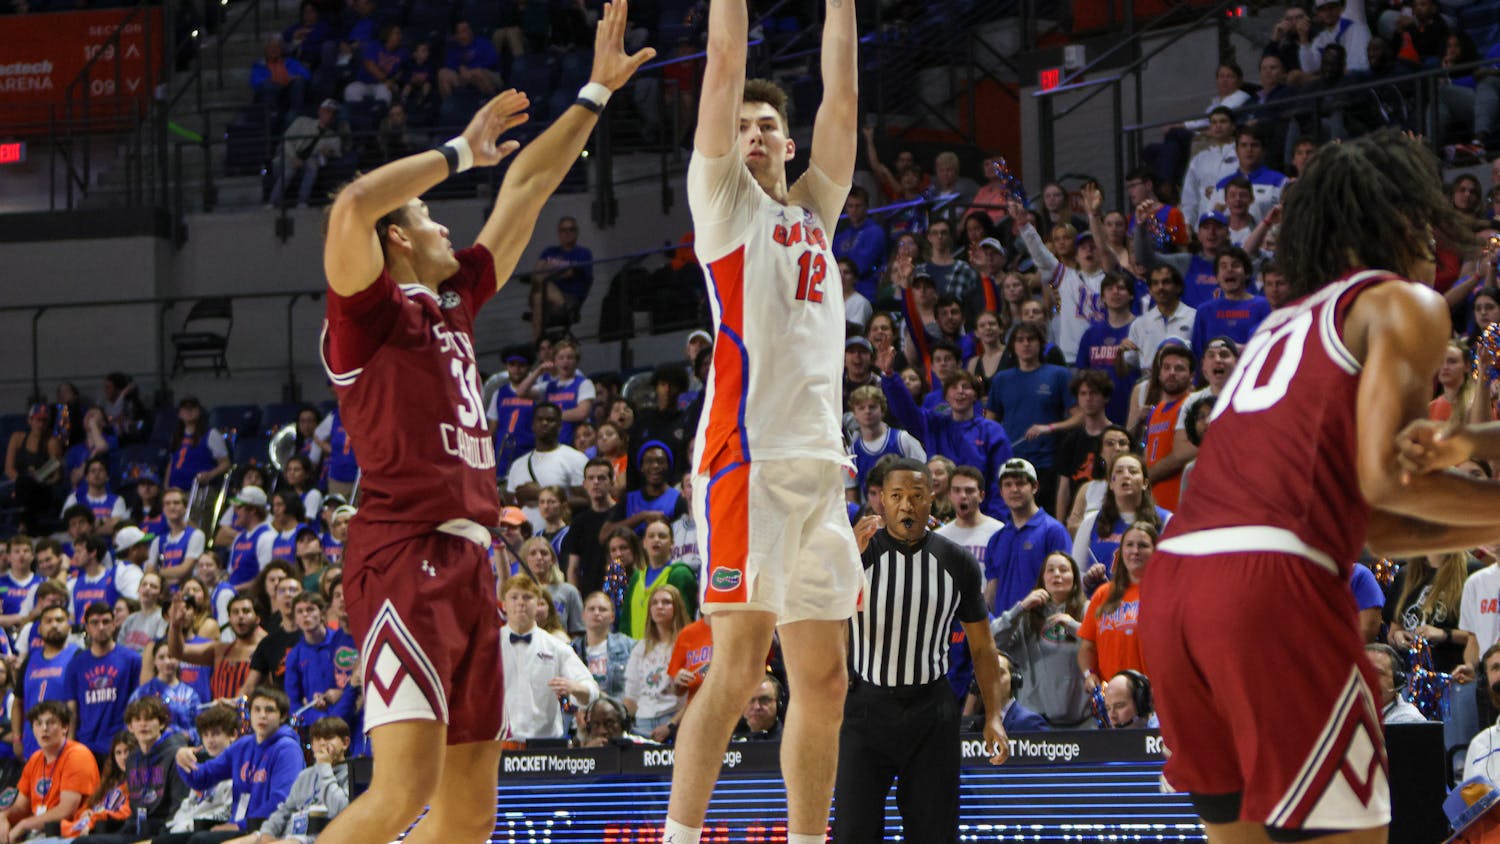 Florida forward Colin Castleton takes a jump shot in the Gators' 81-60 victory against the South Carolina Gamecocks Wednesday, Jan. 25, 2023.